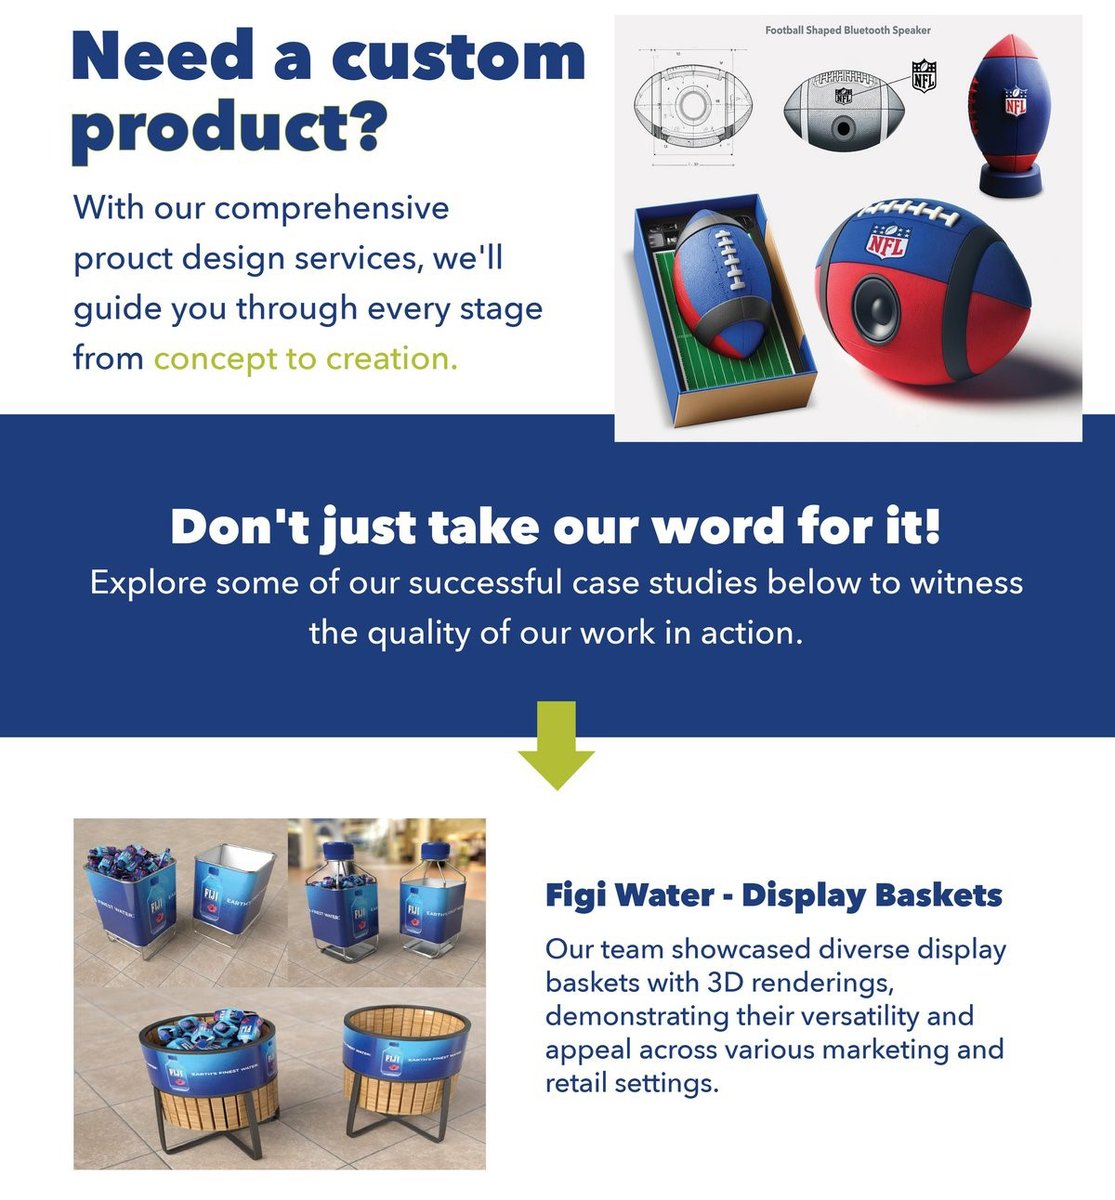 From concept to creation, Greater Pacific will guide you seamlessly through every stage. Call us today at (888) 424-6847 for more info about our capabilities!
 
 #promotionalproducts #promotionalitems #customorder #promotionalgifts #marketing #ppai